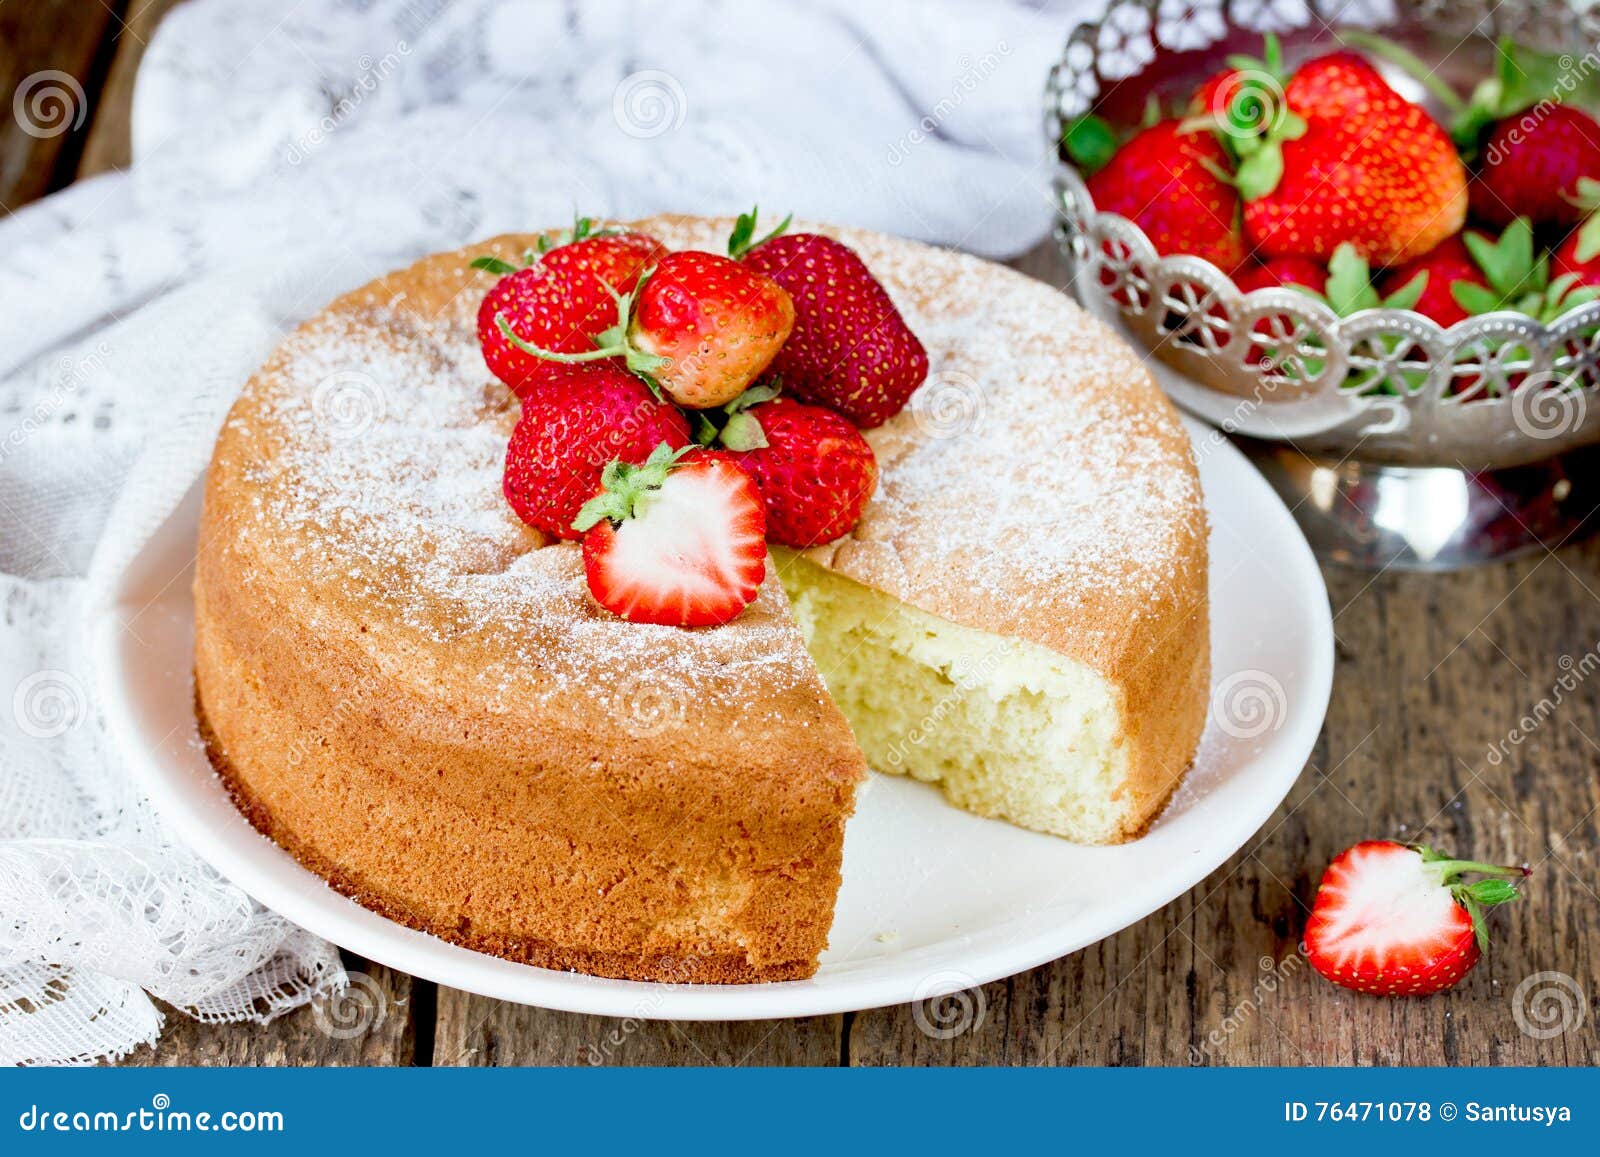 italian sponge cake pan di spagna with strawberry on old wooden